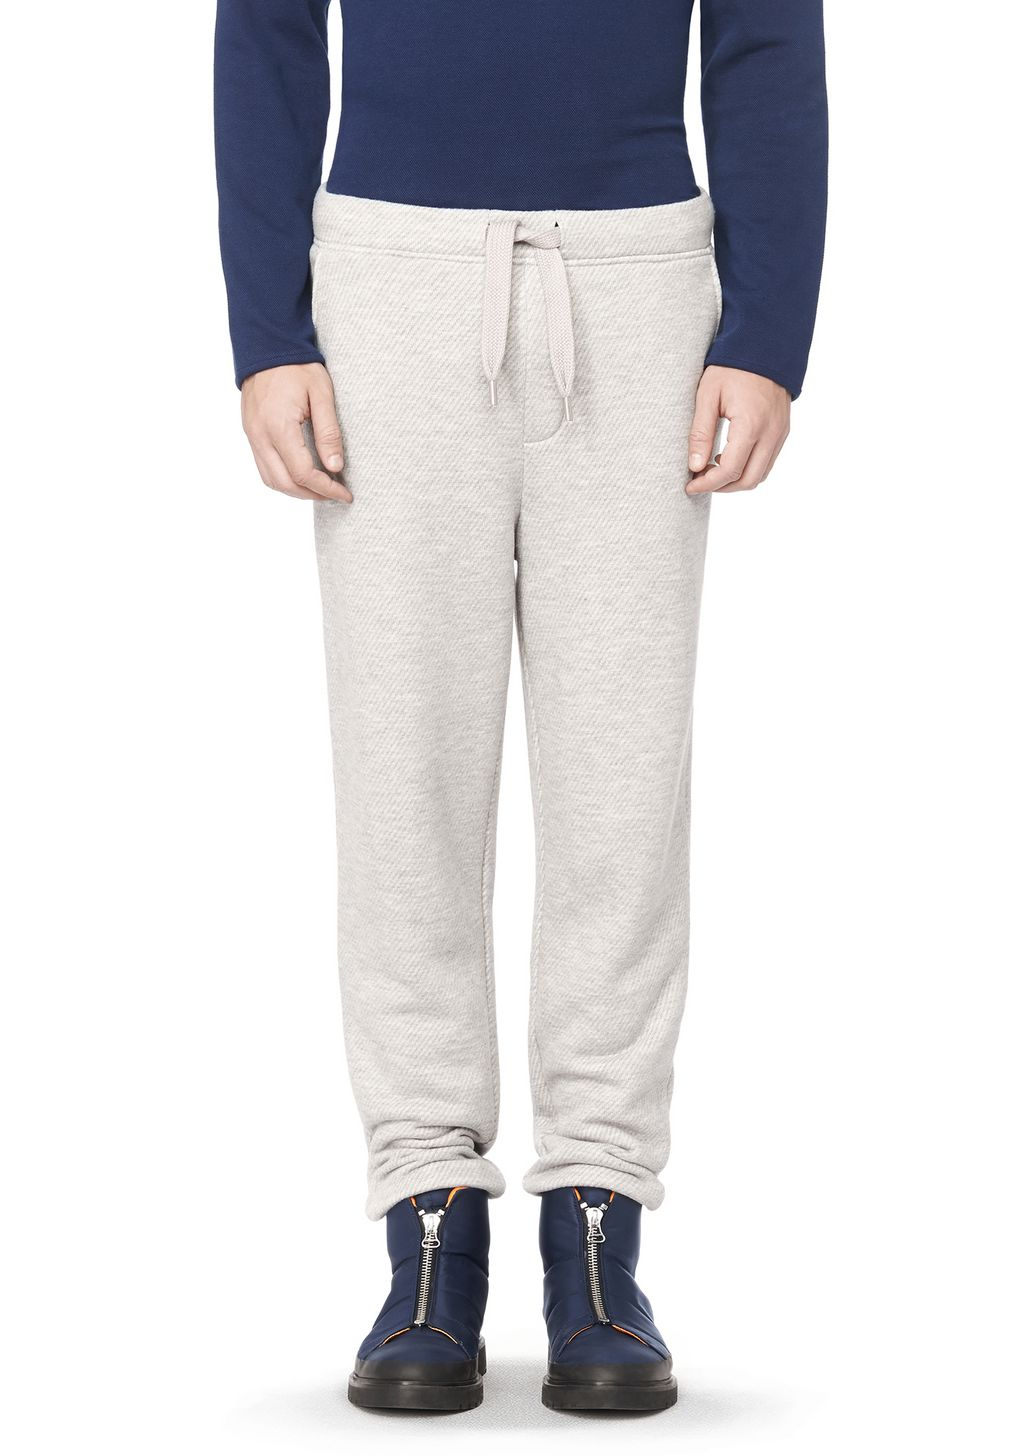 Alexander Wang Twill Terry Sweatpants in Light Gray (Gray) for Men - Lyst